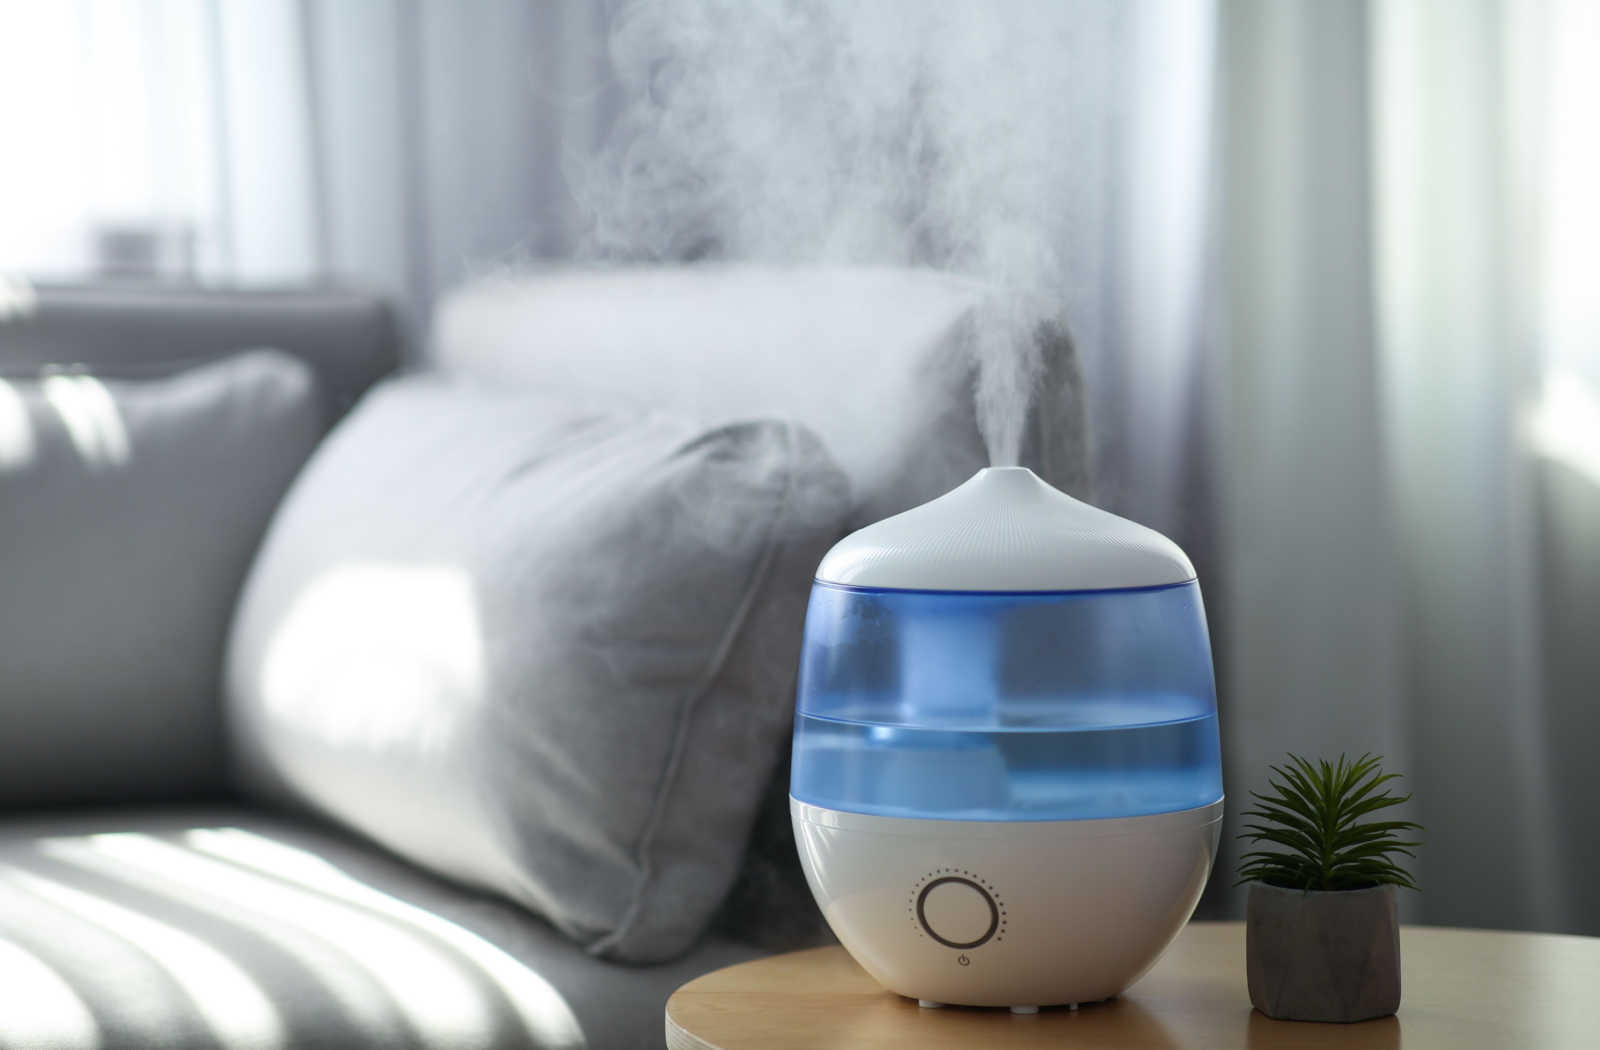 A humidifier placed on a table with a grey couch in the background to help reduce dryness in the atmosphere that can lead to dry eye.